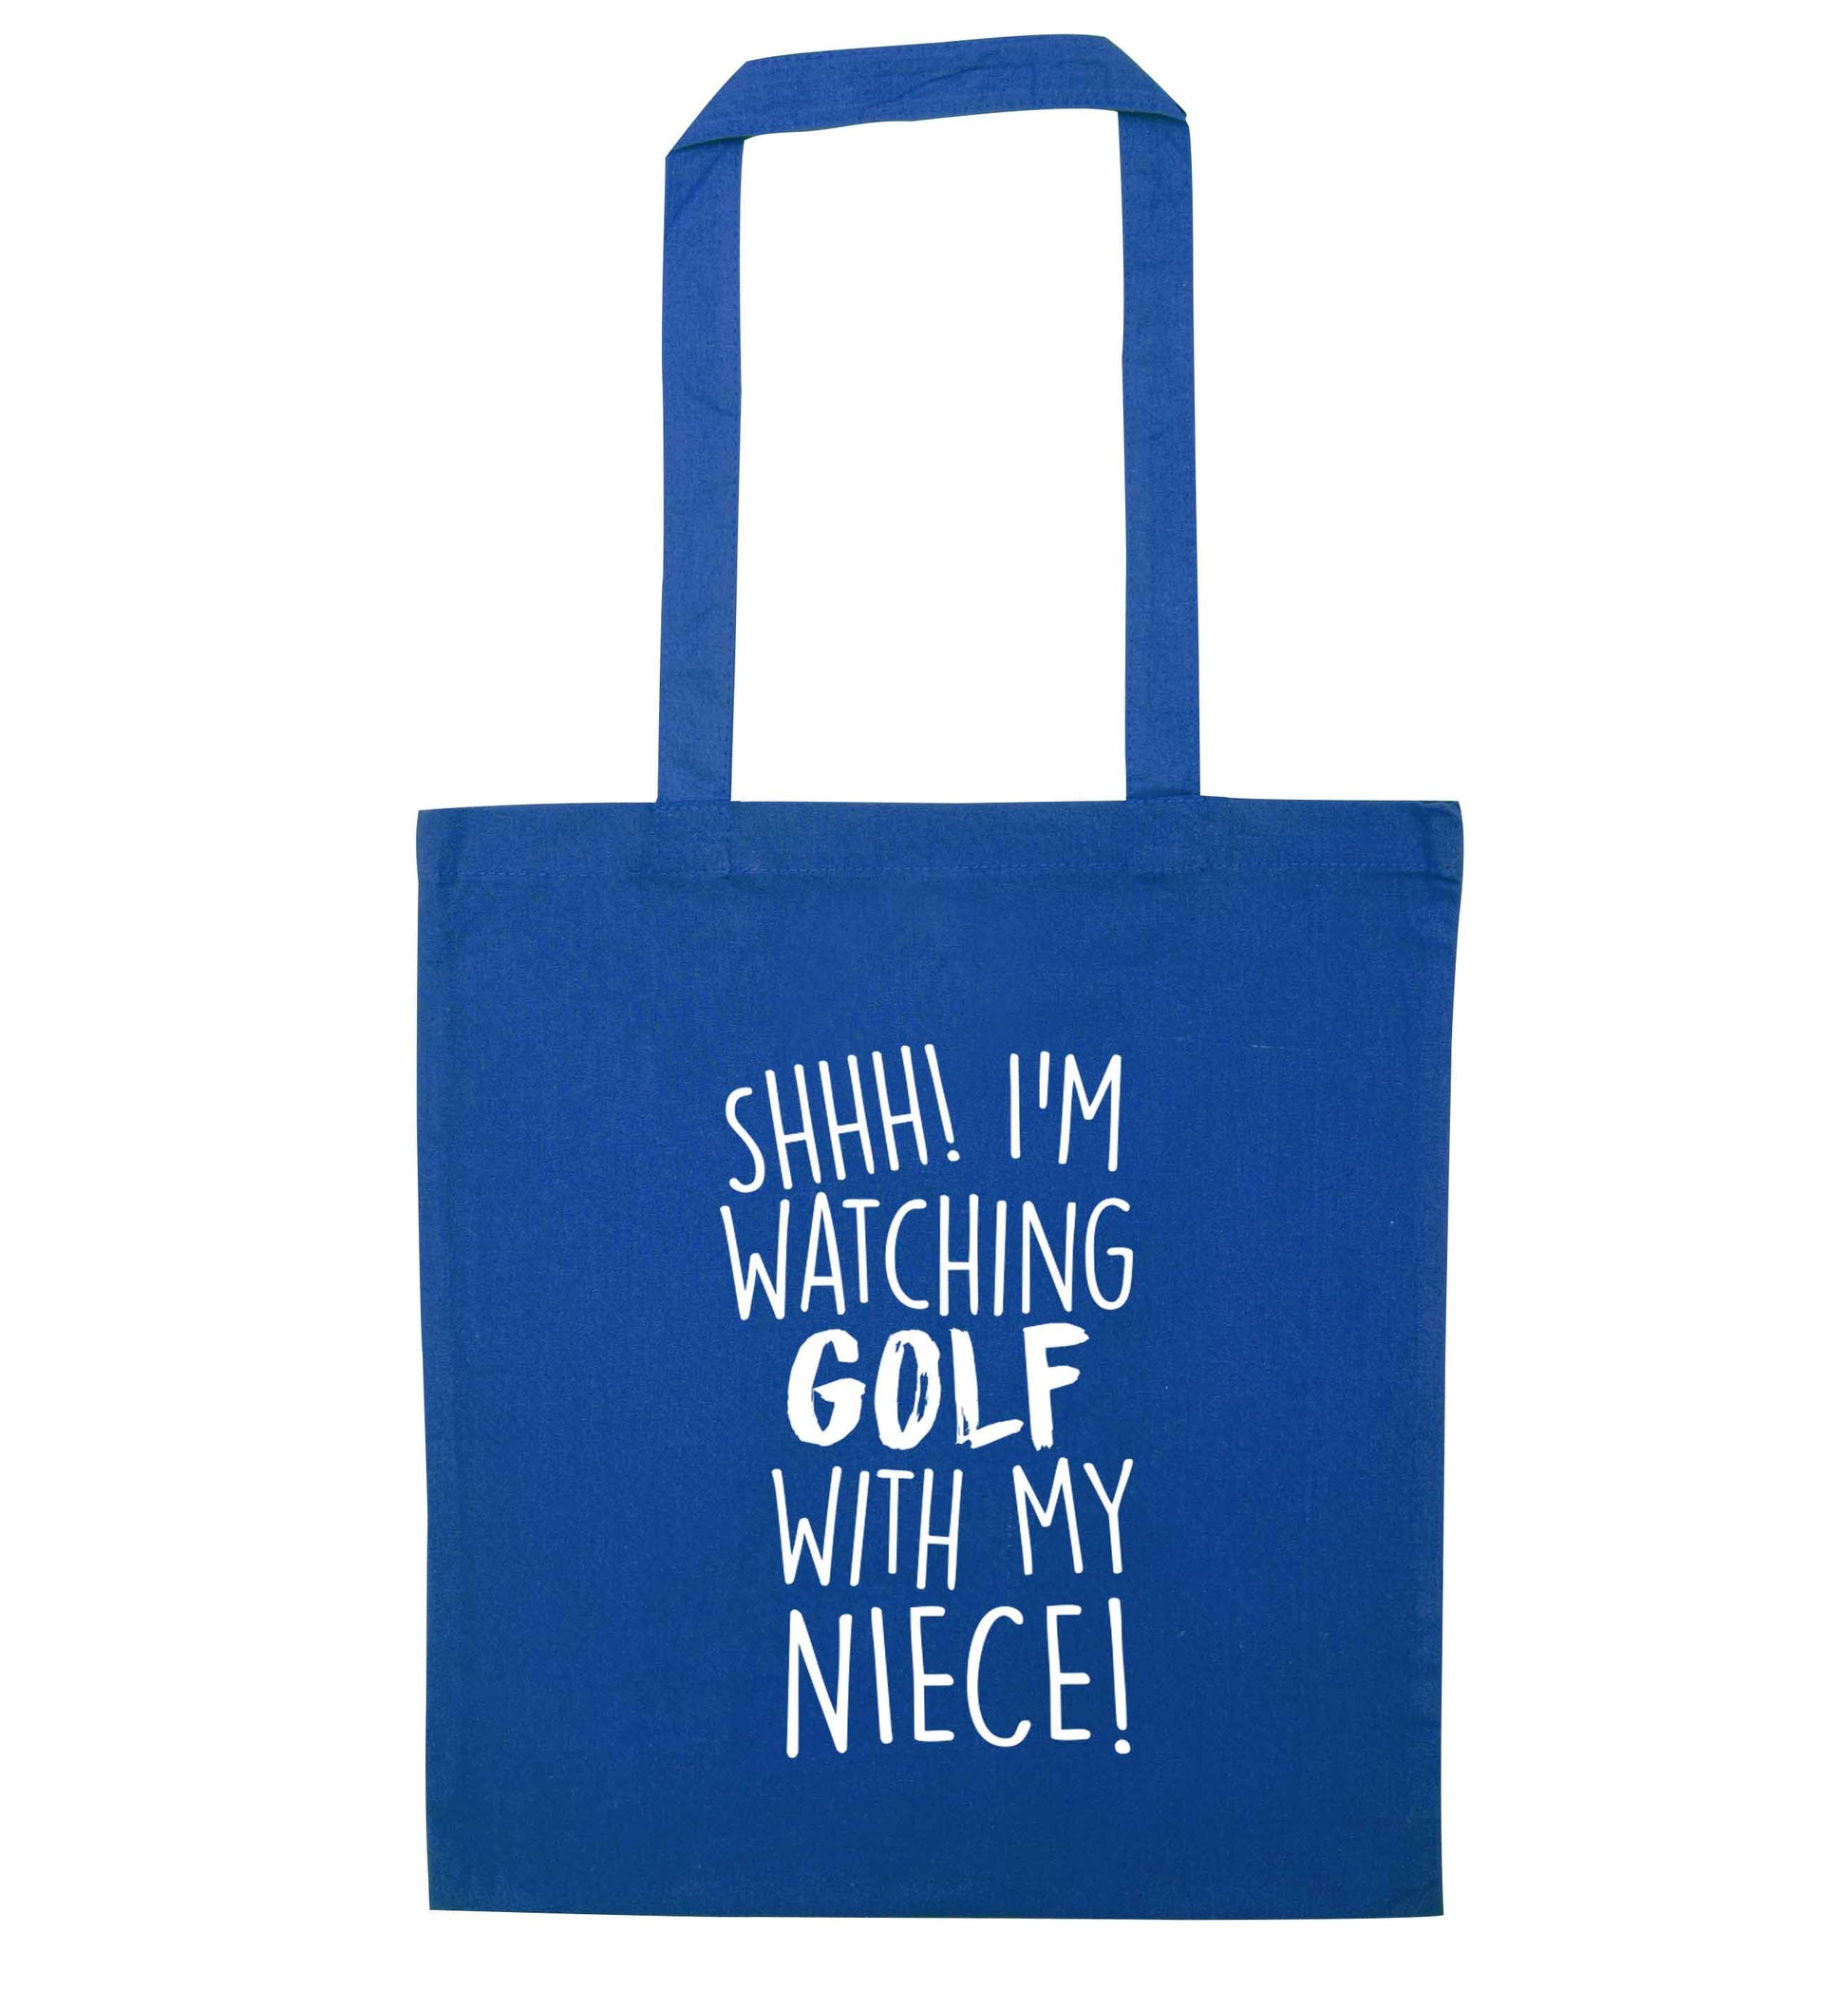 Shh I'm watching golf with my niece blue tote bag